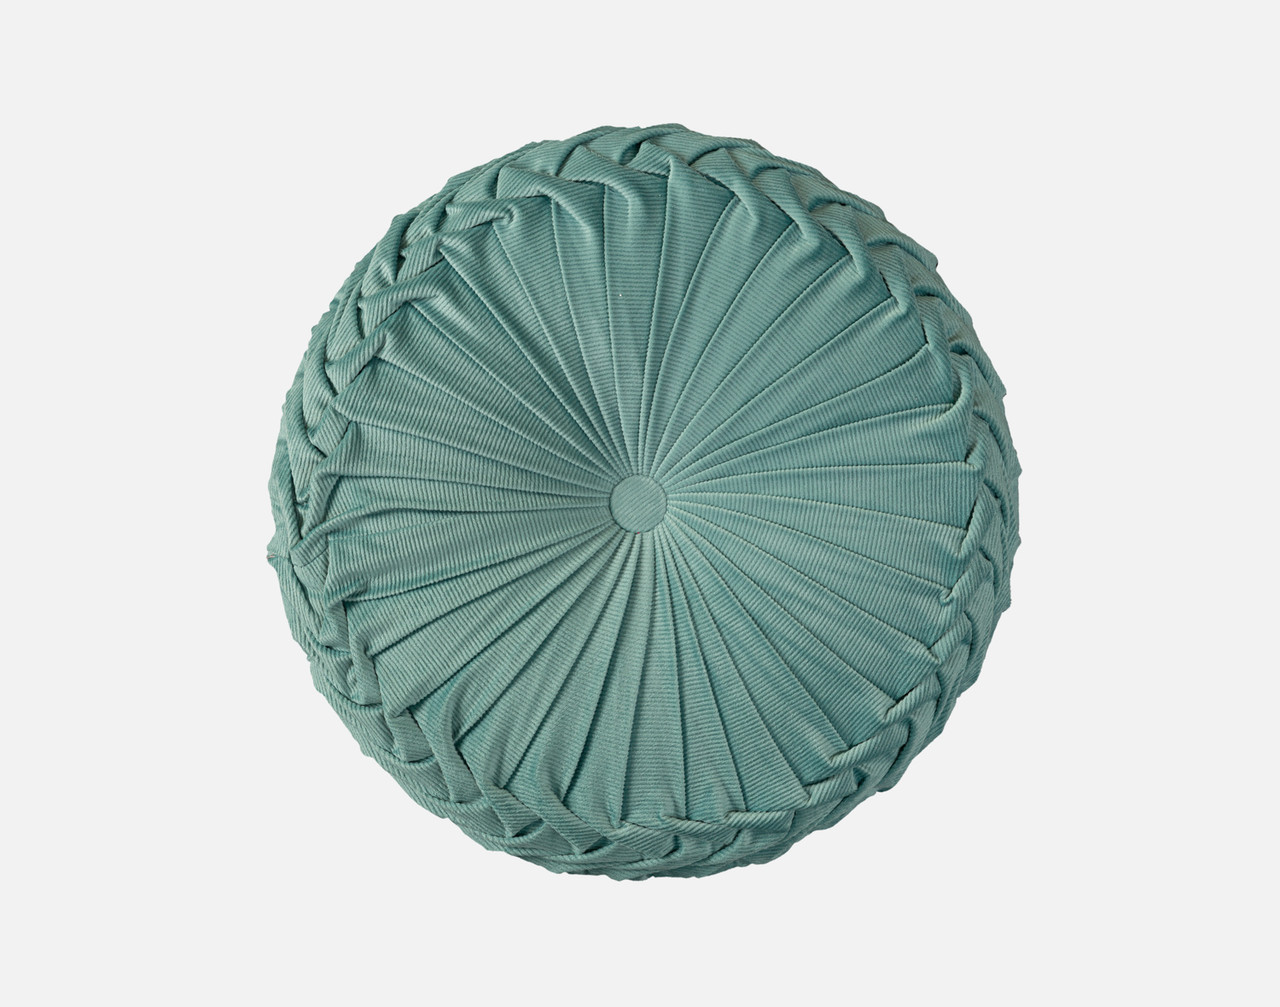 Top view of our Pin-Tuck Round Corduroy Cushion in Aqua sitting against a solid white background.